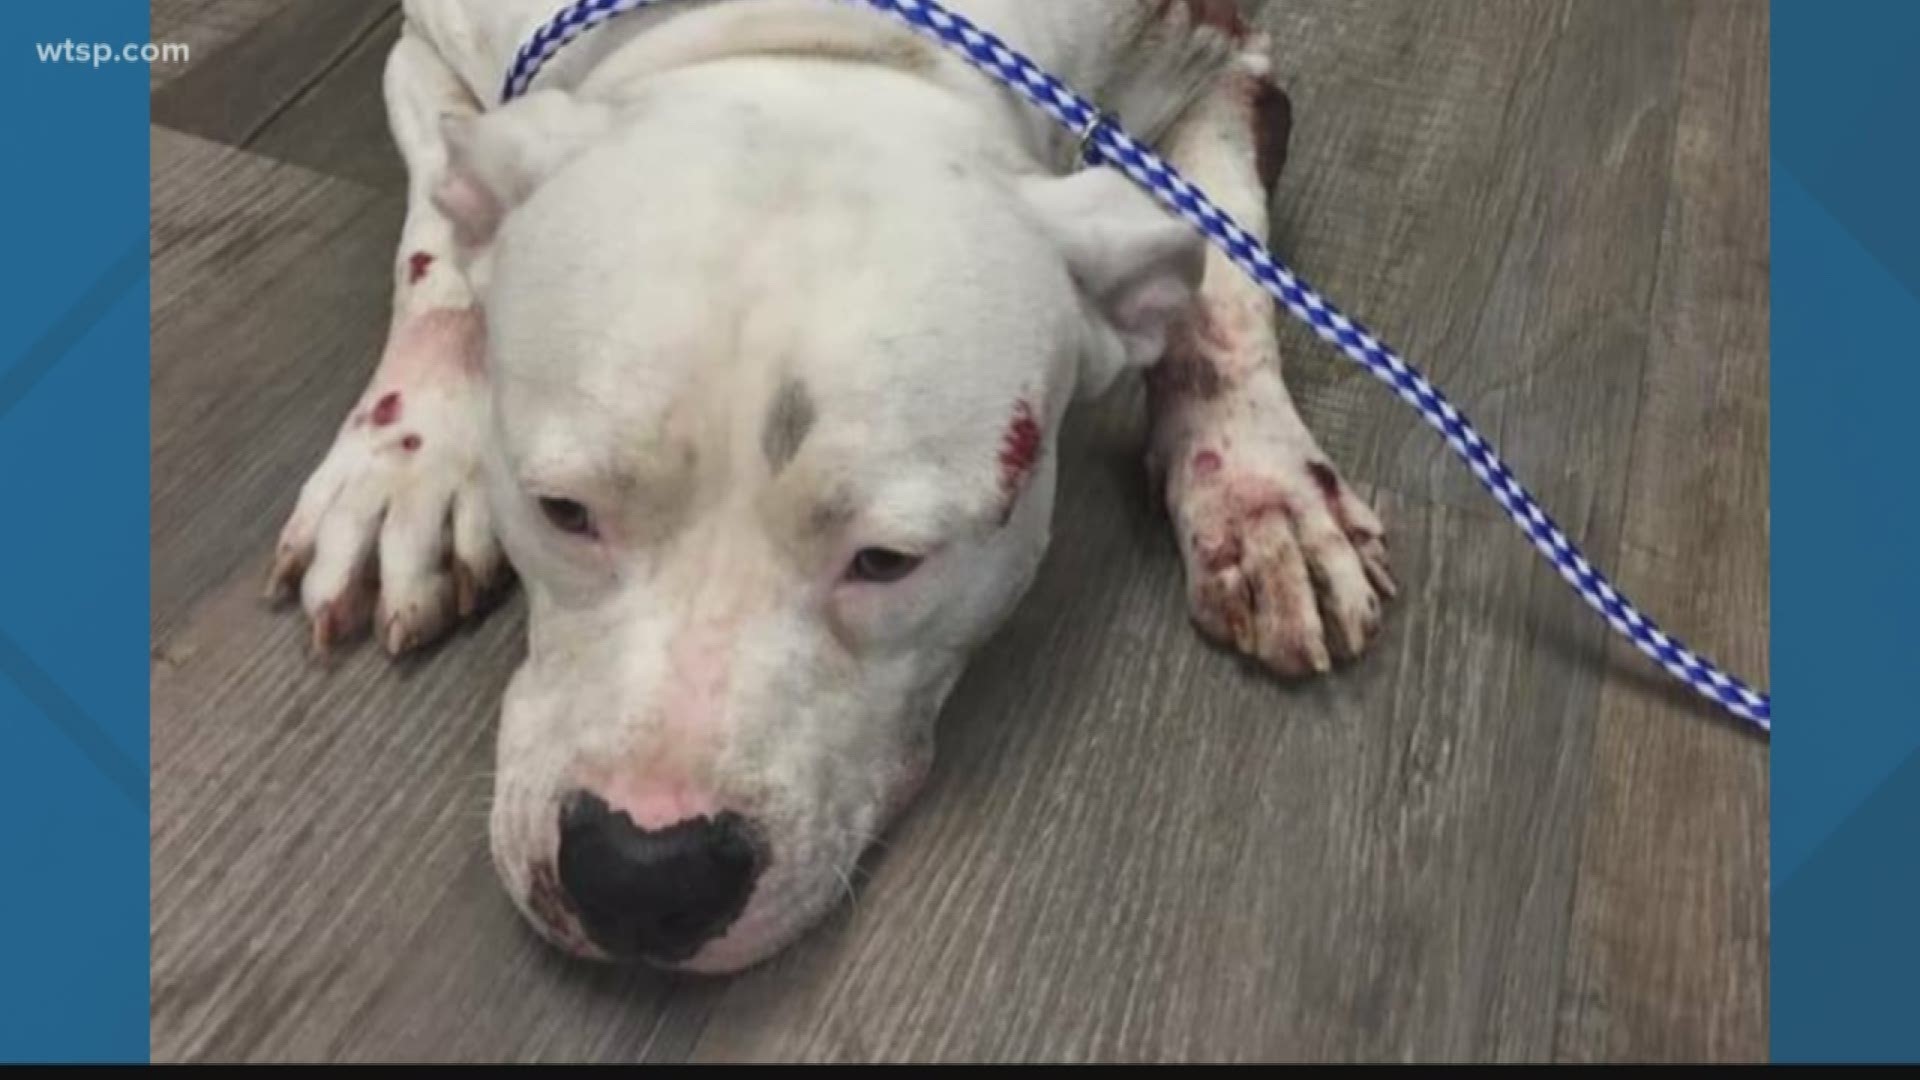 The owner of a veterinary clinic helped save the life of a dog that was being dragged behind a truck, and now they're hoping to find the person who was driving the truck.

Jan Johnson of Nature Coast Animal Wellness & Surgical Center of Weeki Wachee saw the pit bull was being dragged behind a truck on Northcliffe Boulevard on Friday.